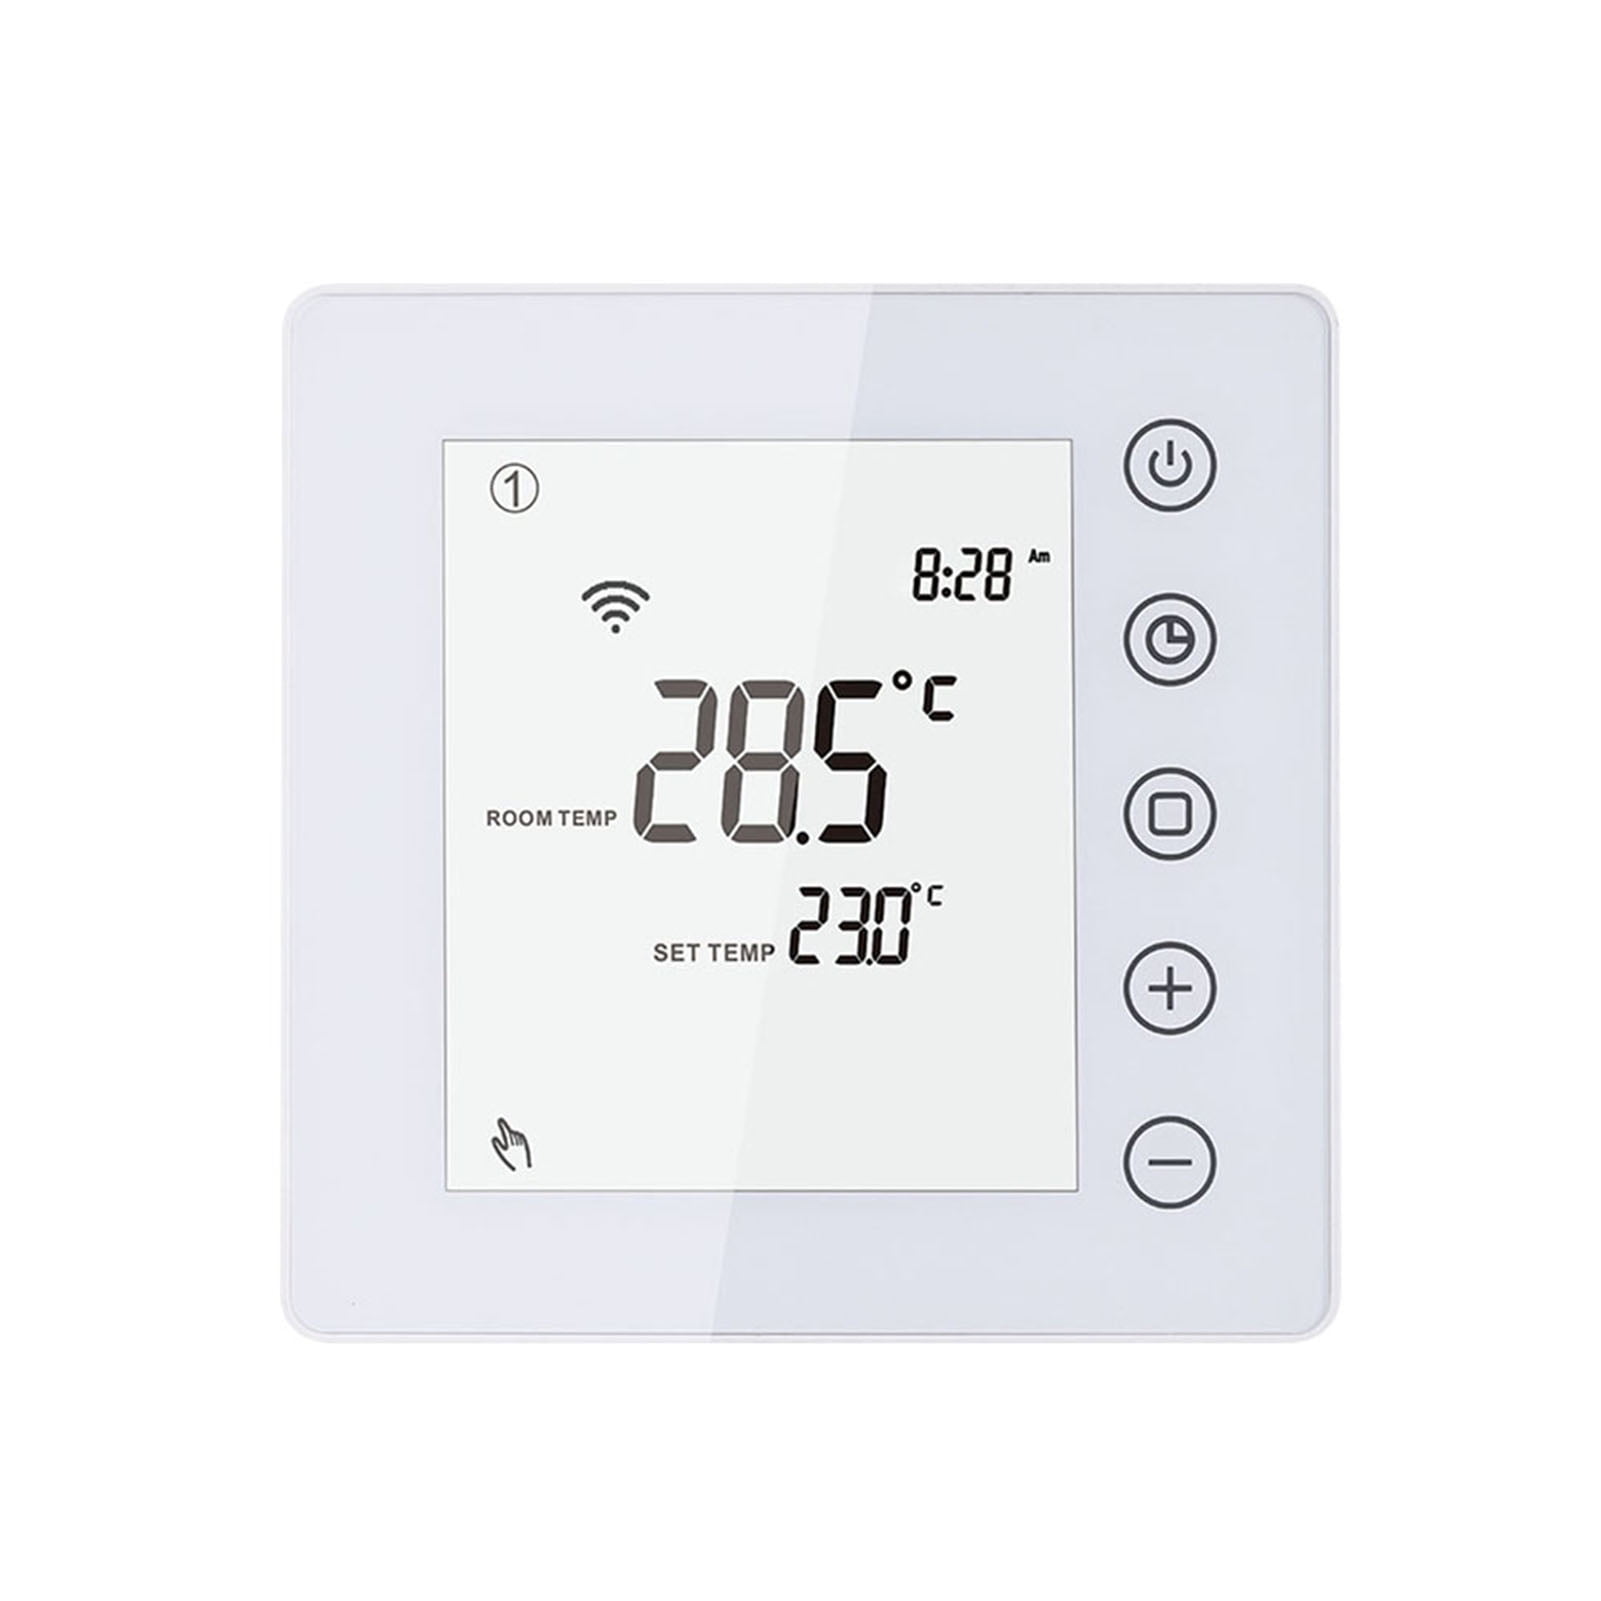 kimplante Dæmon Betydelig 16A Electric Heating Thermostat SmartLife APP Control WiFi Heating Room  Thermostat LCD Touchscreen Digital Smart Temperature Controller Week  Programmable -freeze Energy Saving with External - Walmart.com